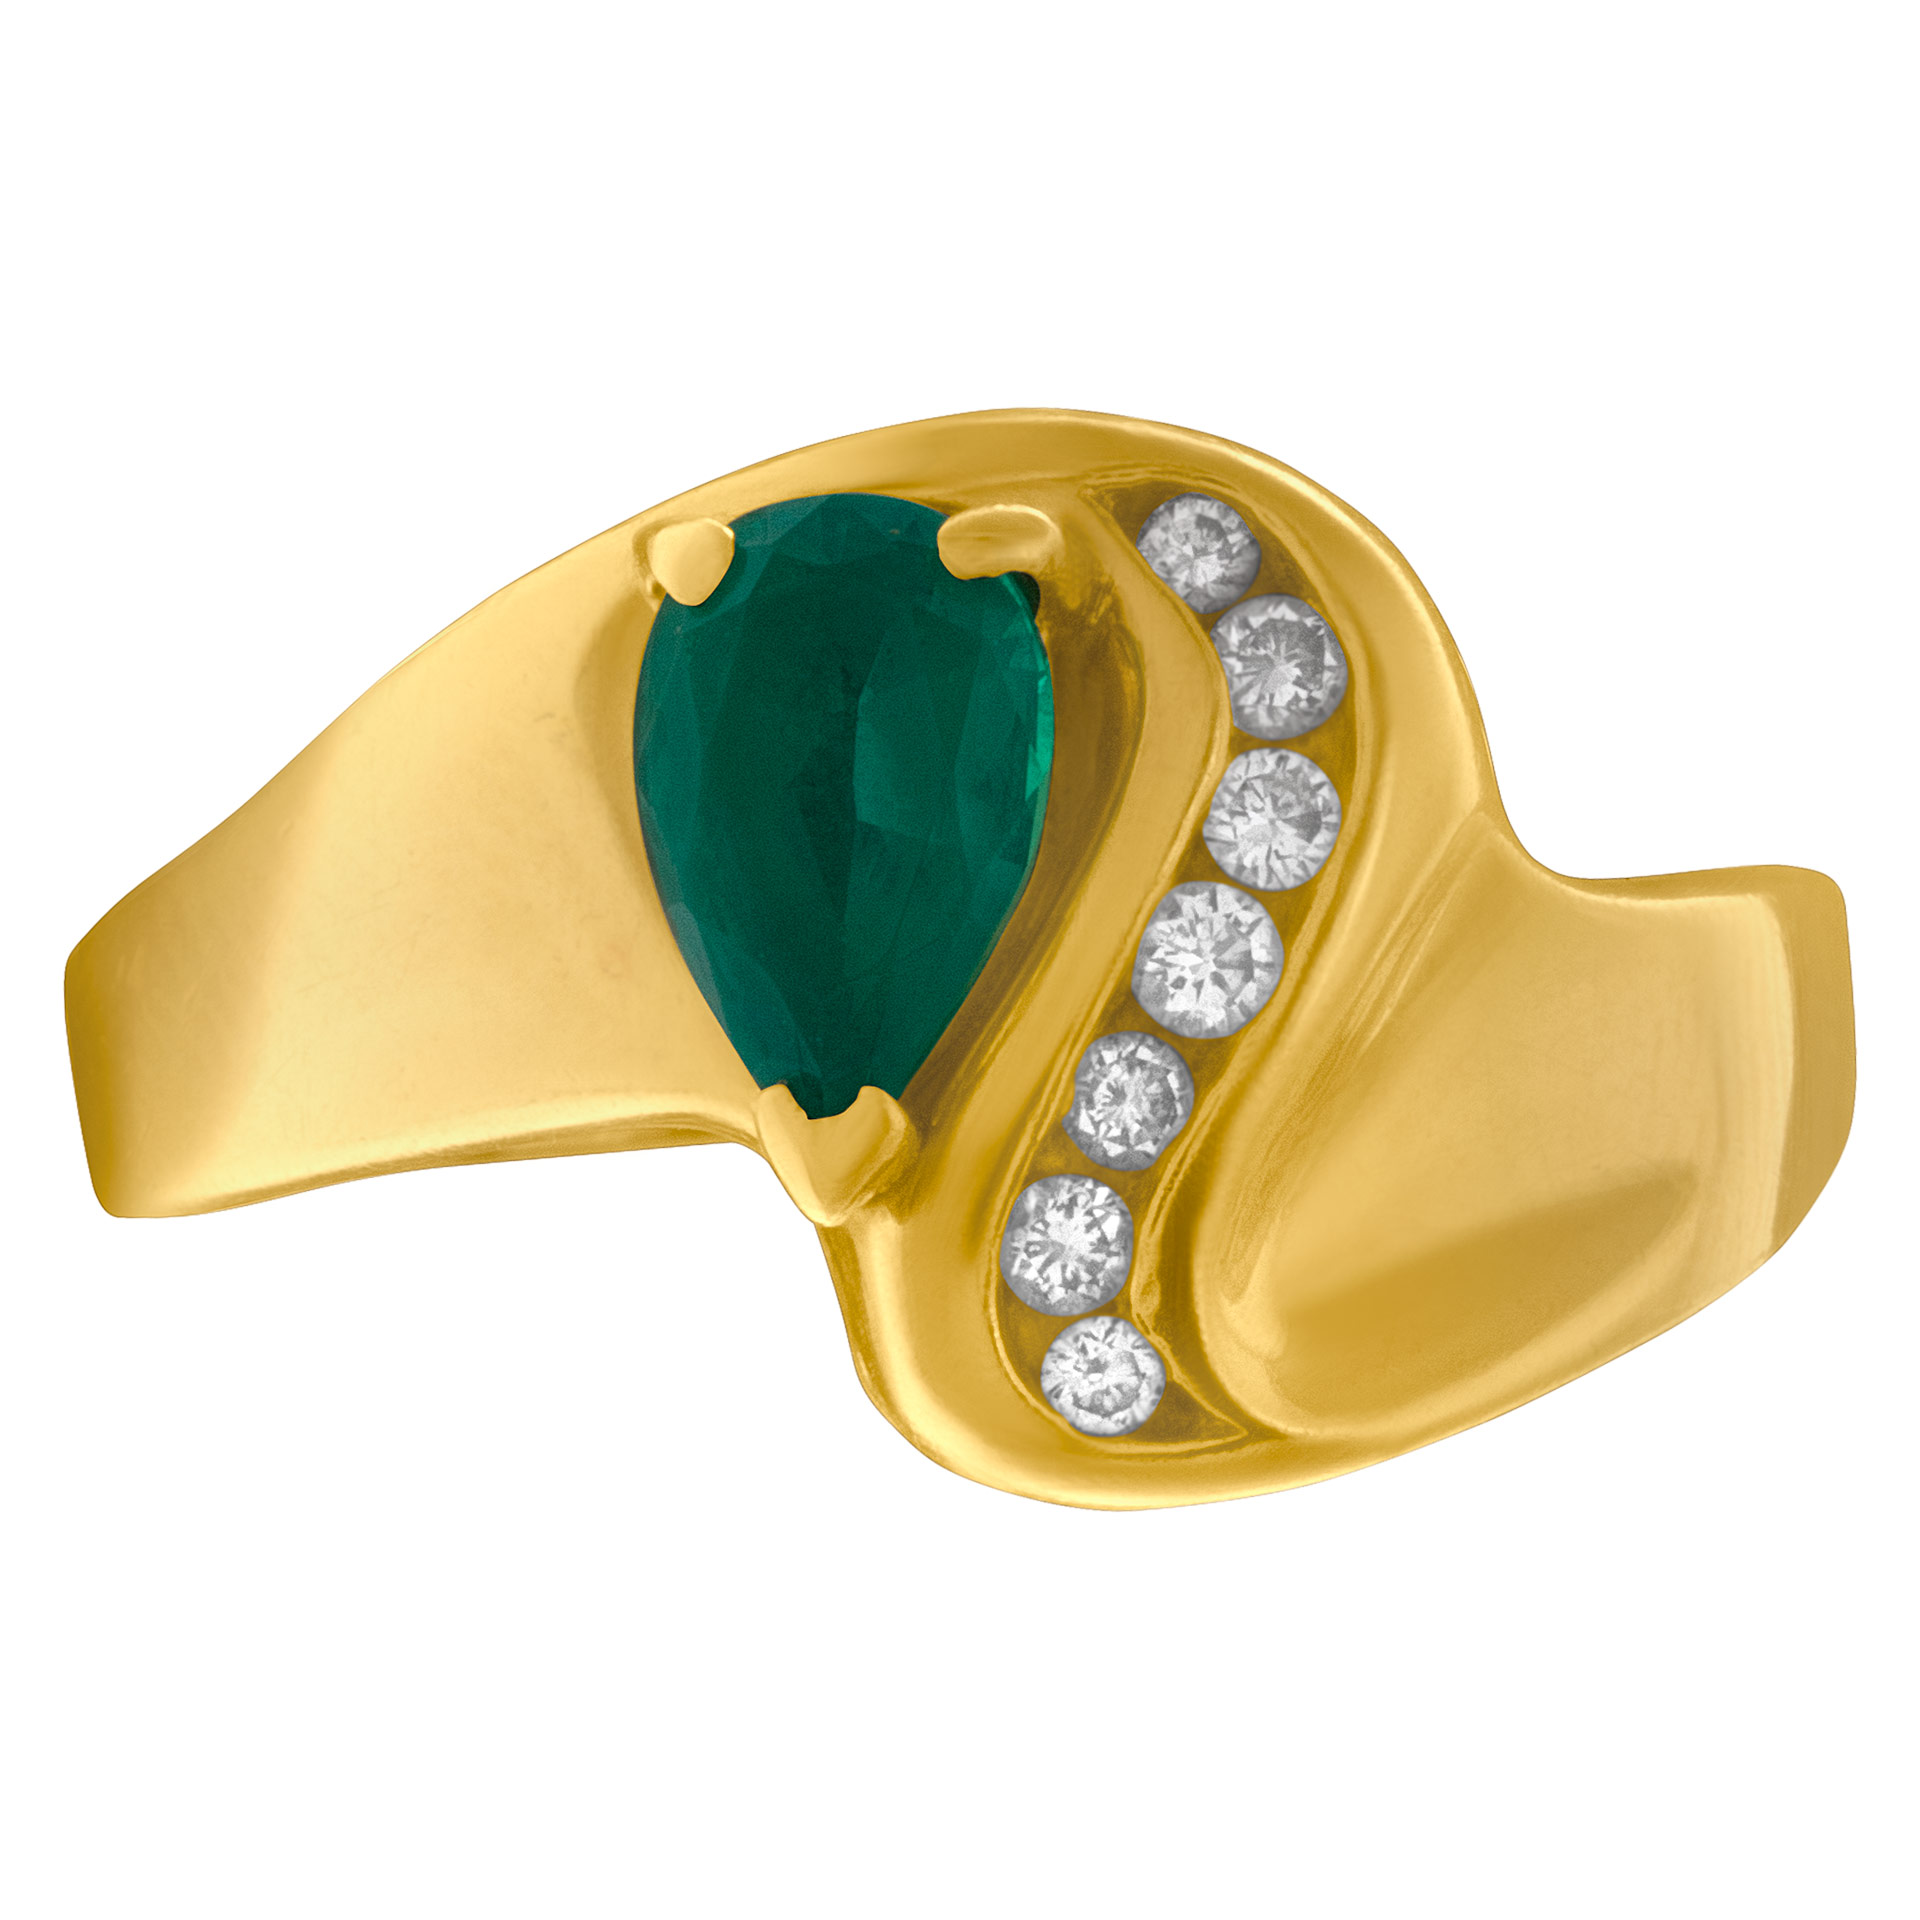 Pear shaped emerald ring with diamond accents in 14k gold